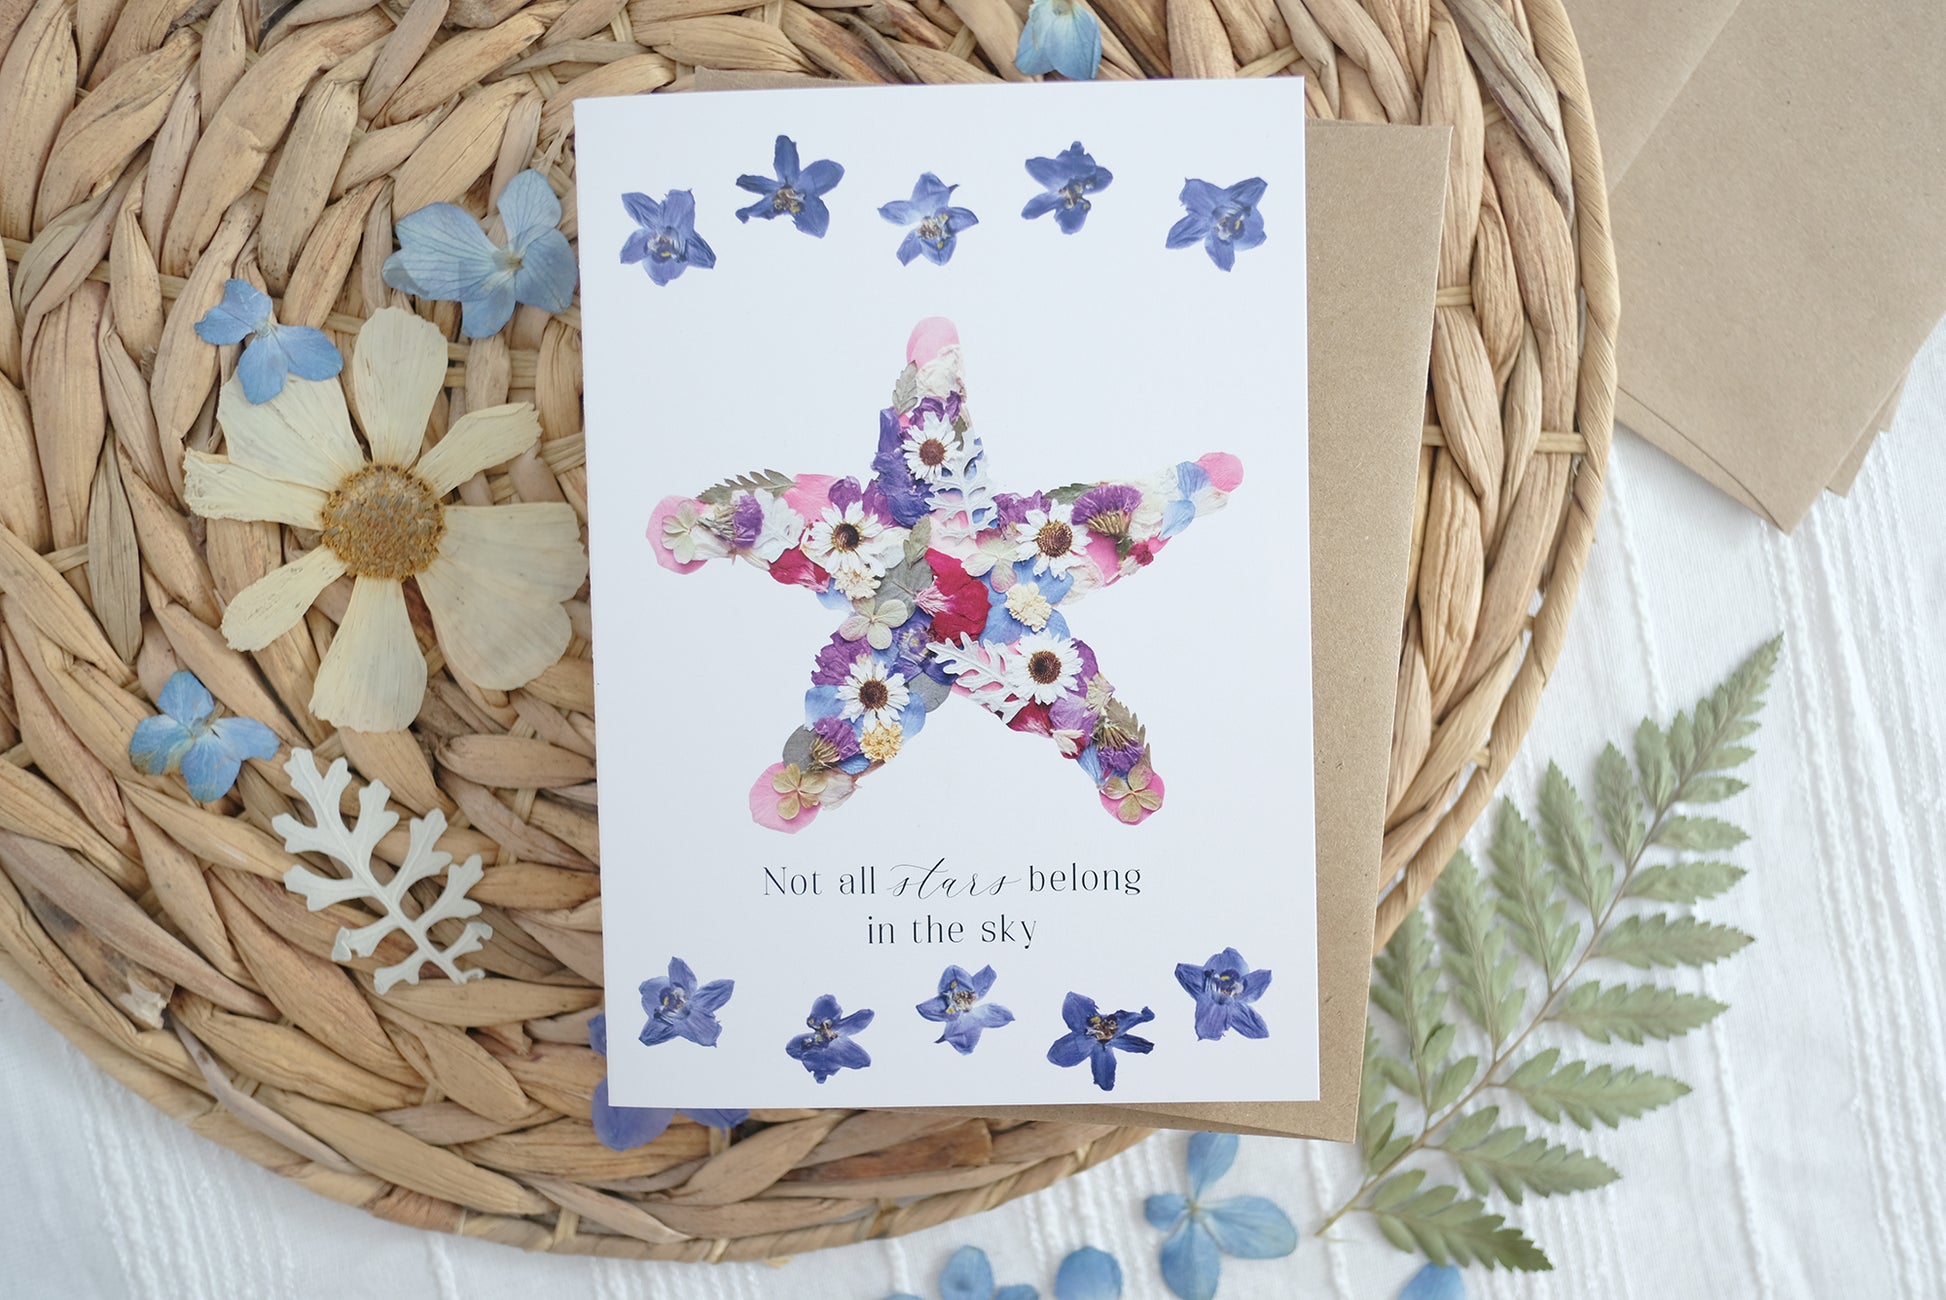 pressed flower starfish, not all stars belong in the sky card for birthday or any occassion